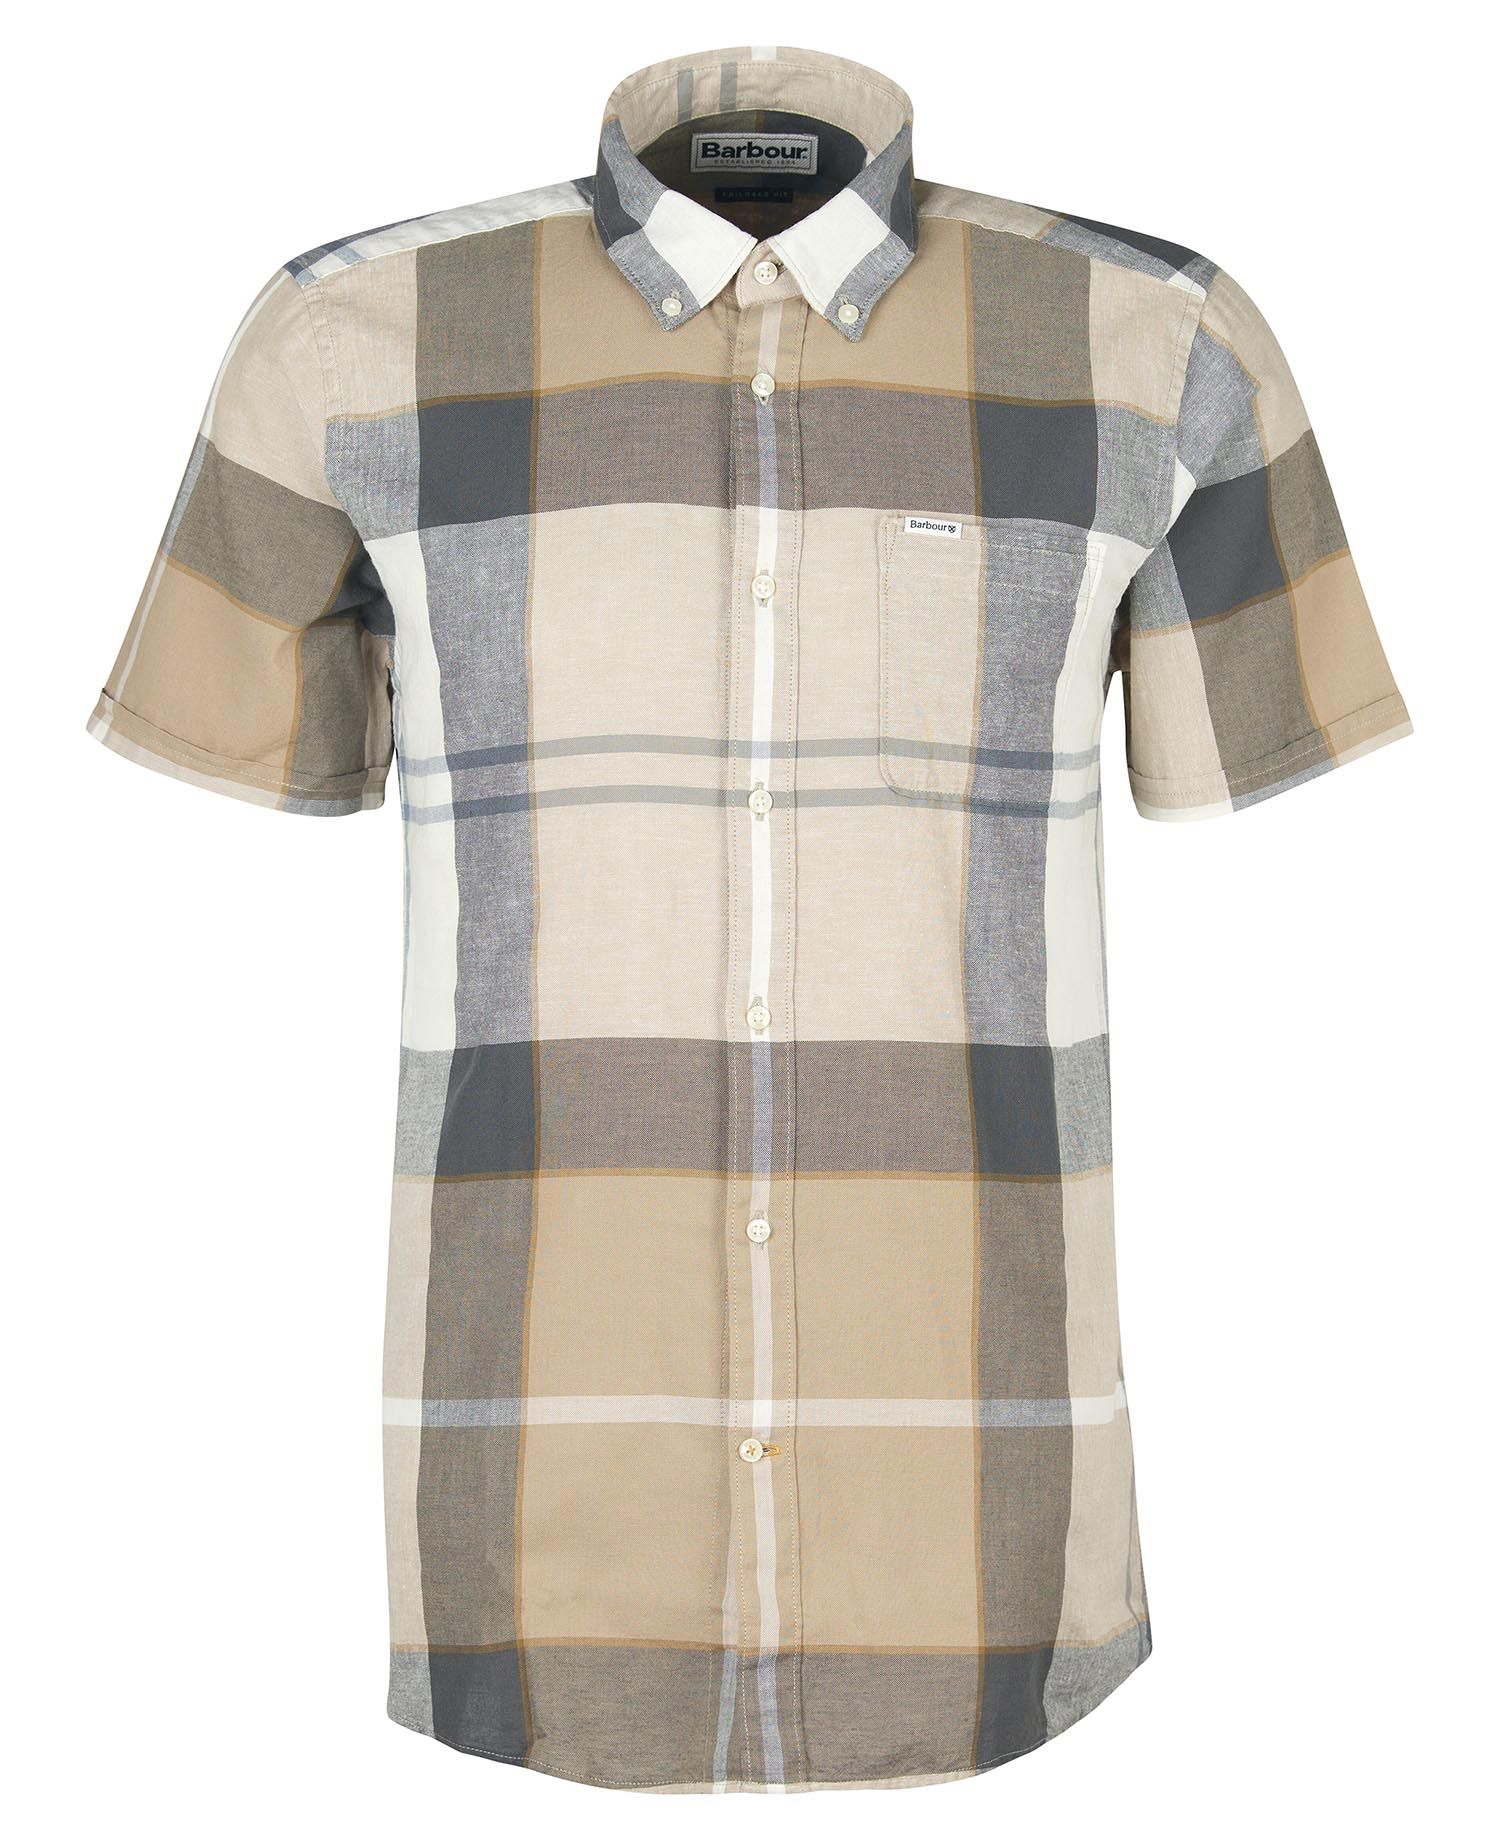 Shop the Barbour Douglas Short Sleeve Tailored Shirt today. | Barbour